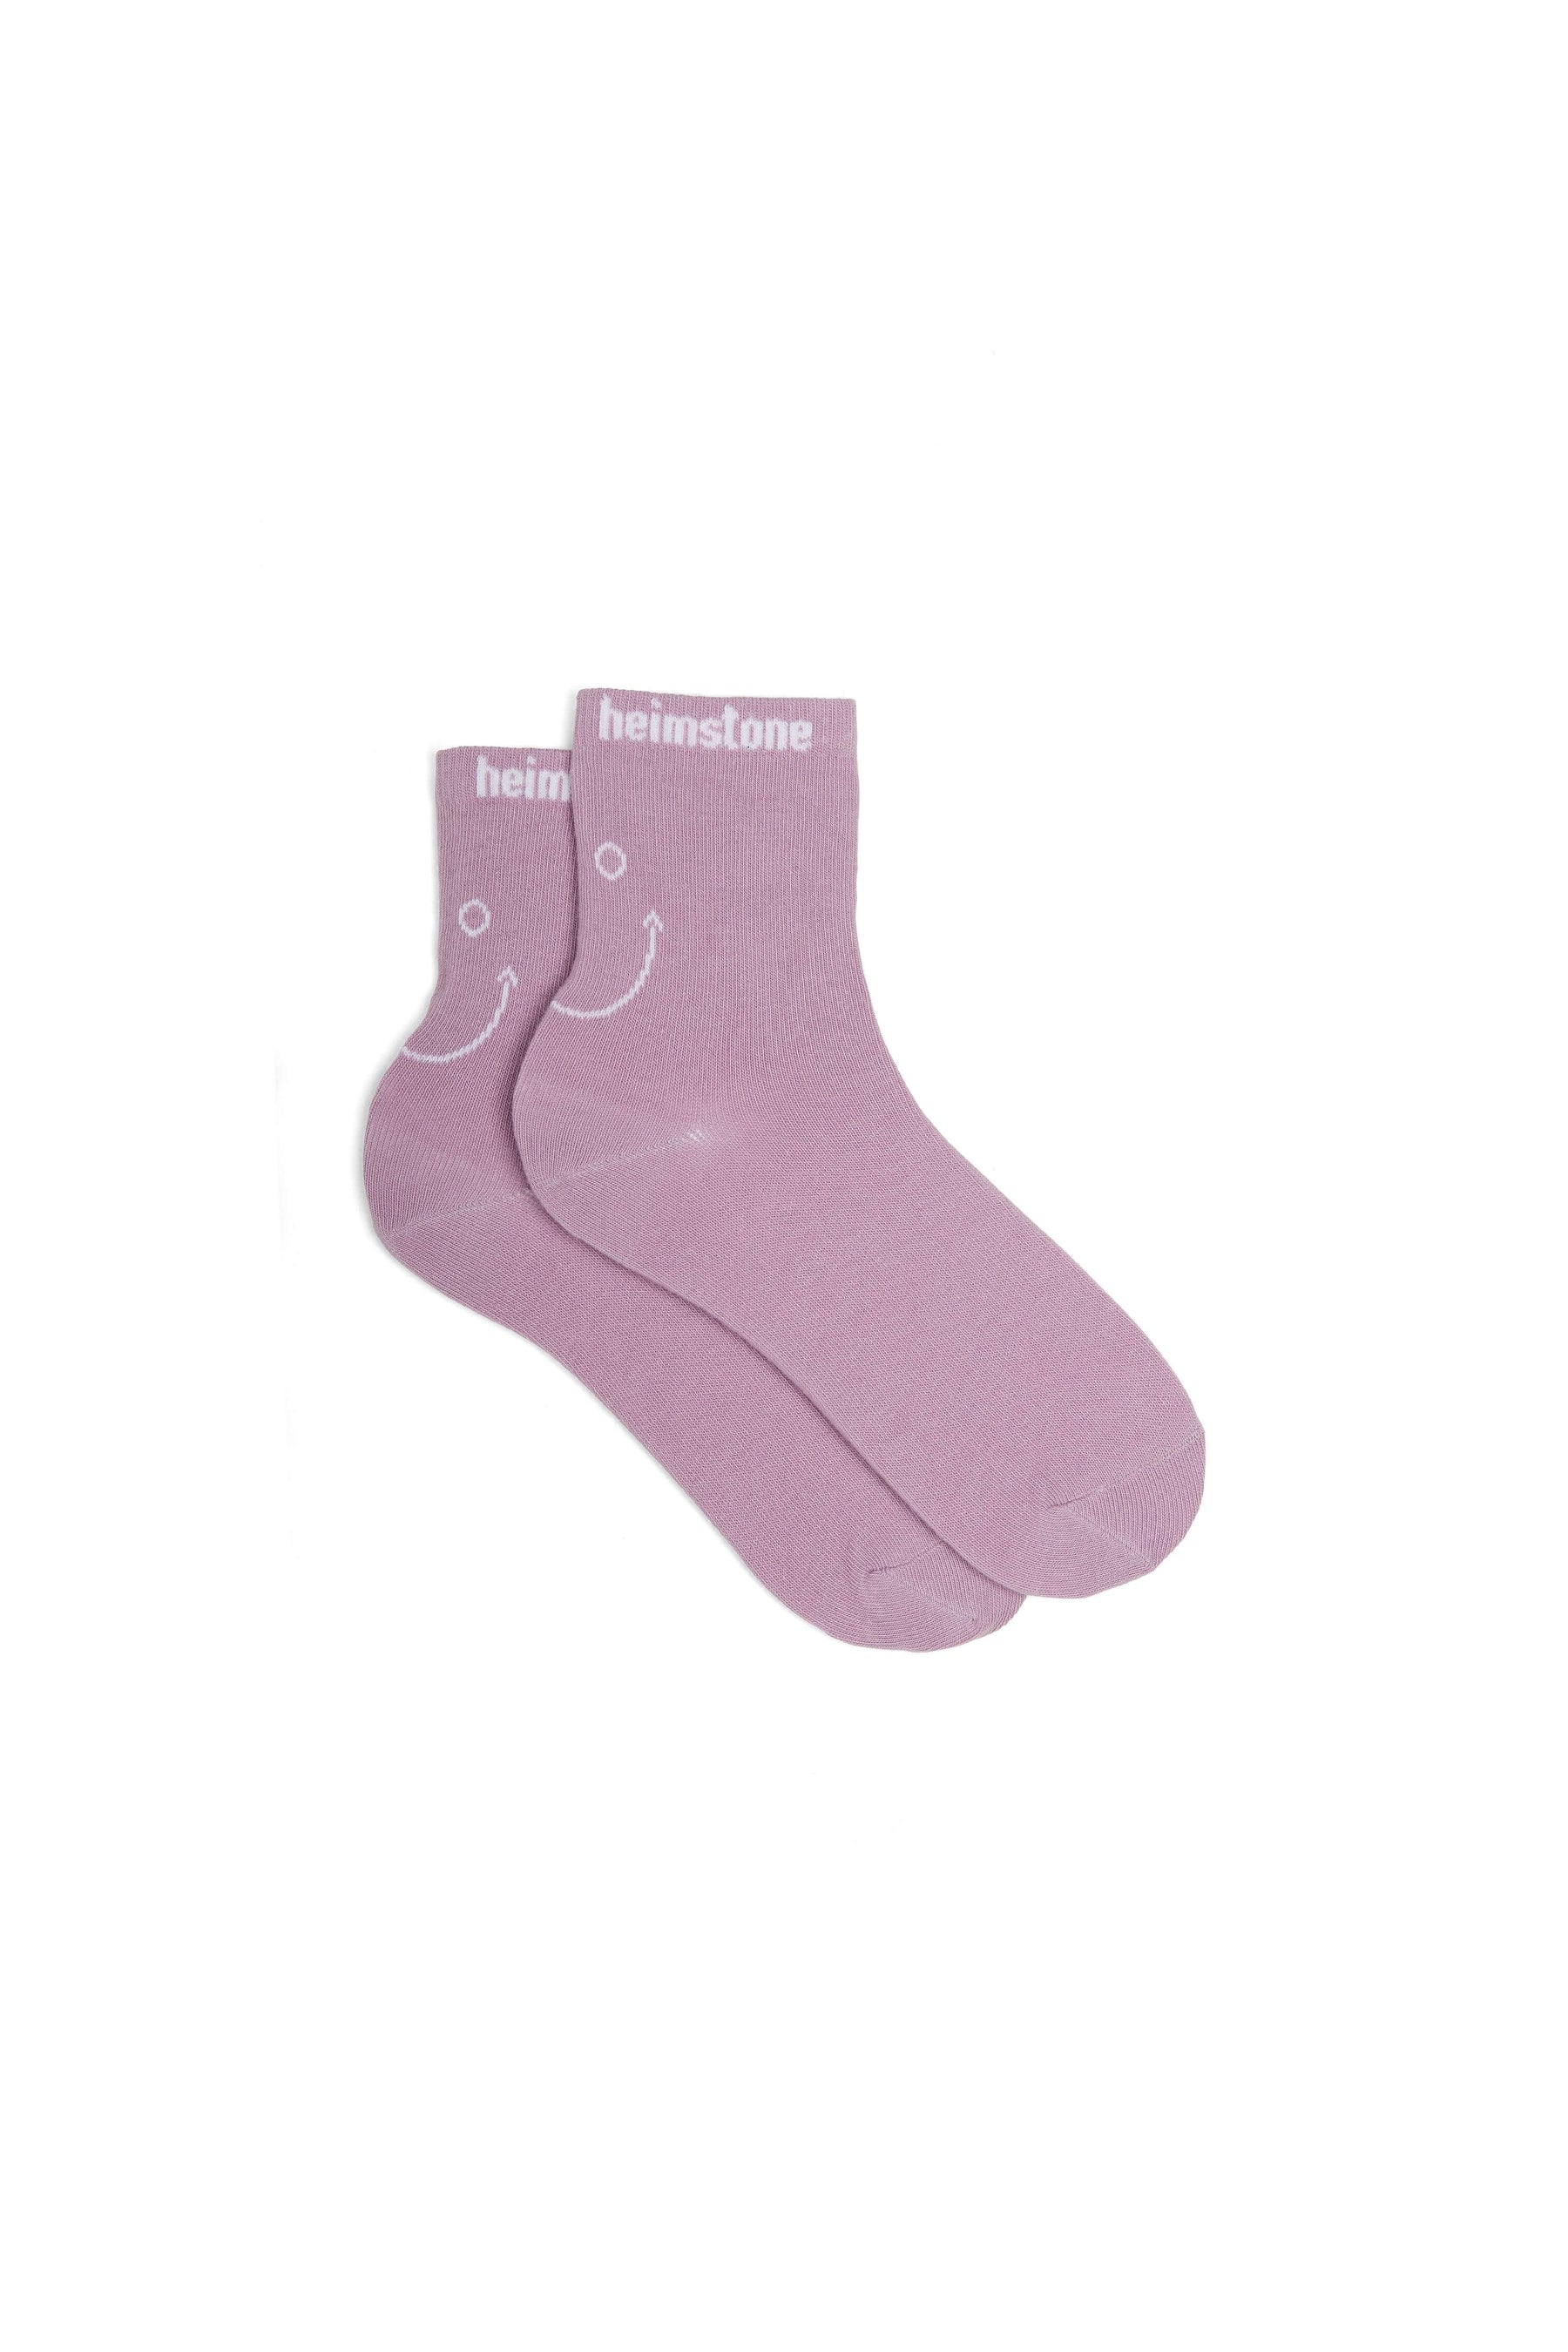 Ankle socks in lilac Smiley | Heimstone